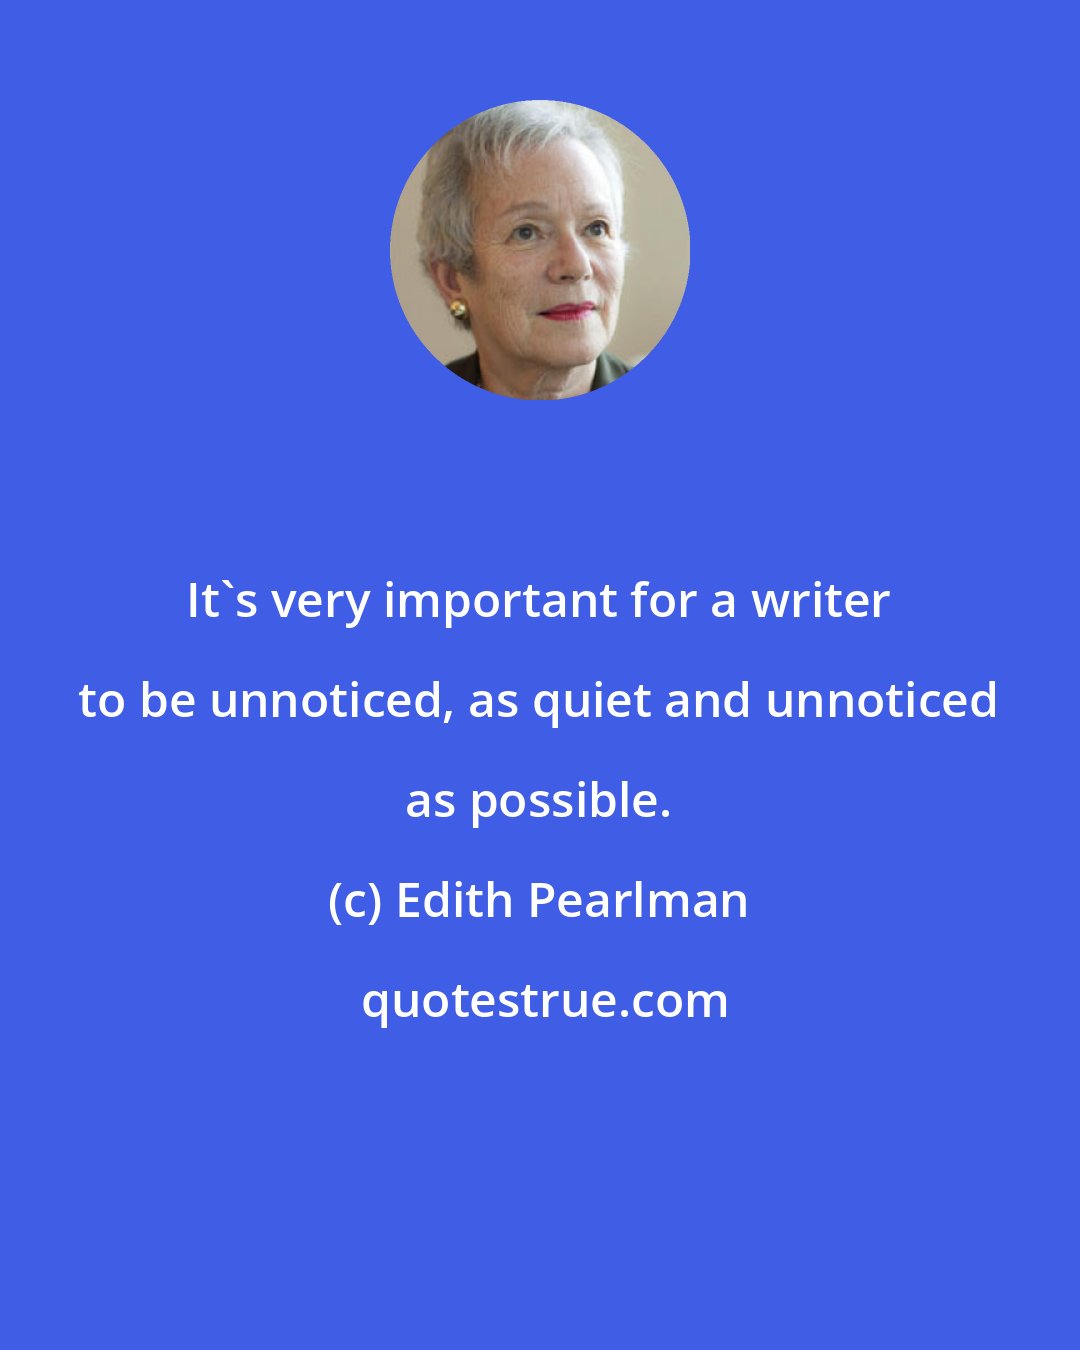 Edith Pearlman: It's very important for a writer to be unnoticed, as quiet and unnoticed as possible.